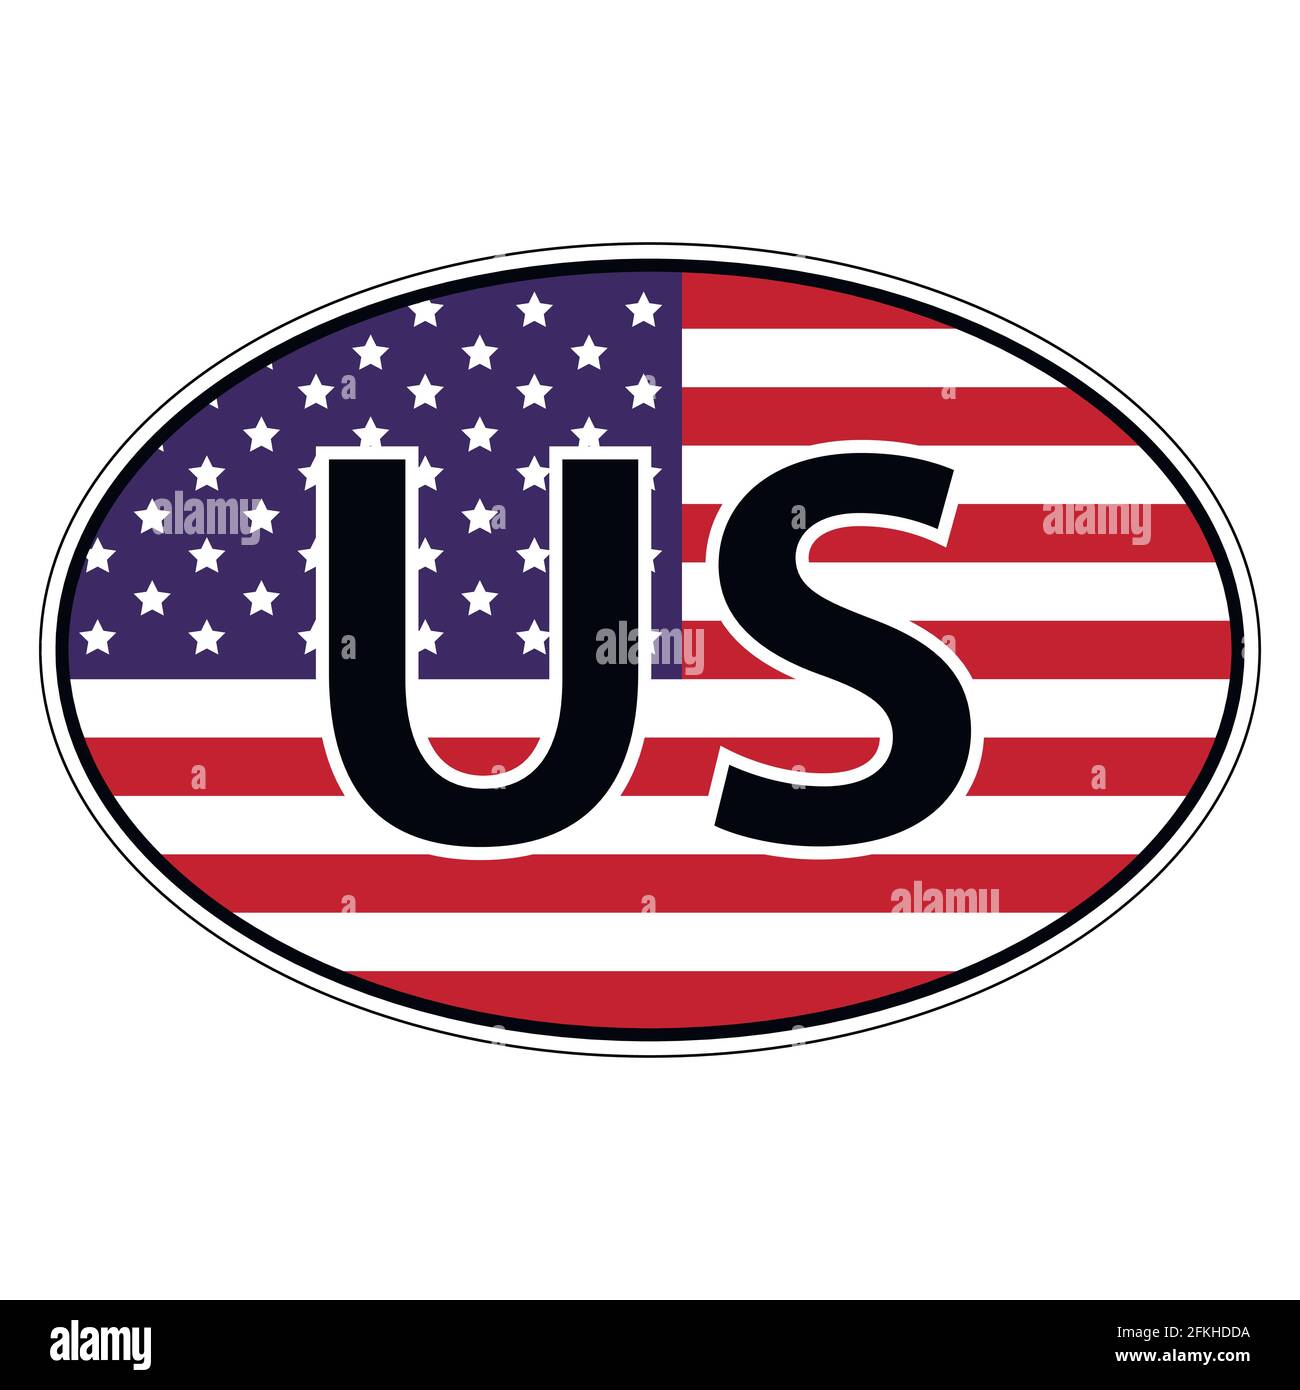 Sticker on car, flag of United States of America Stock Vector